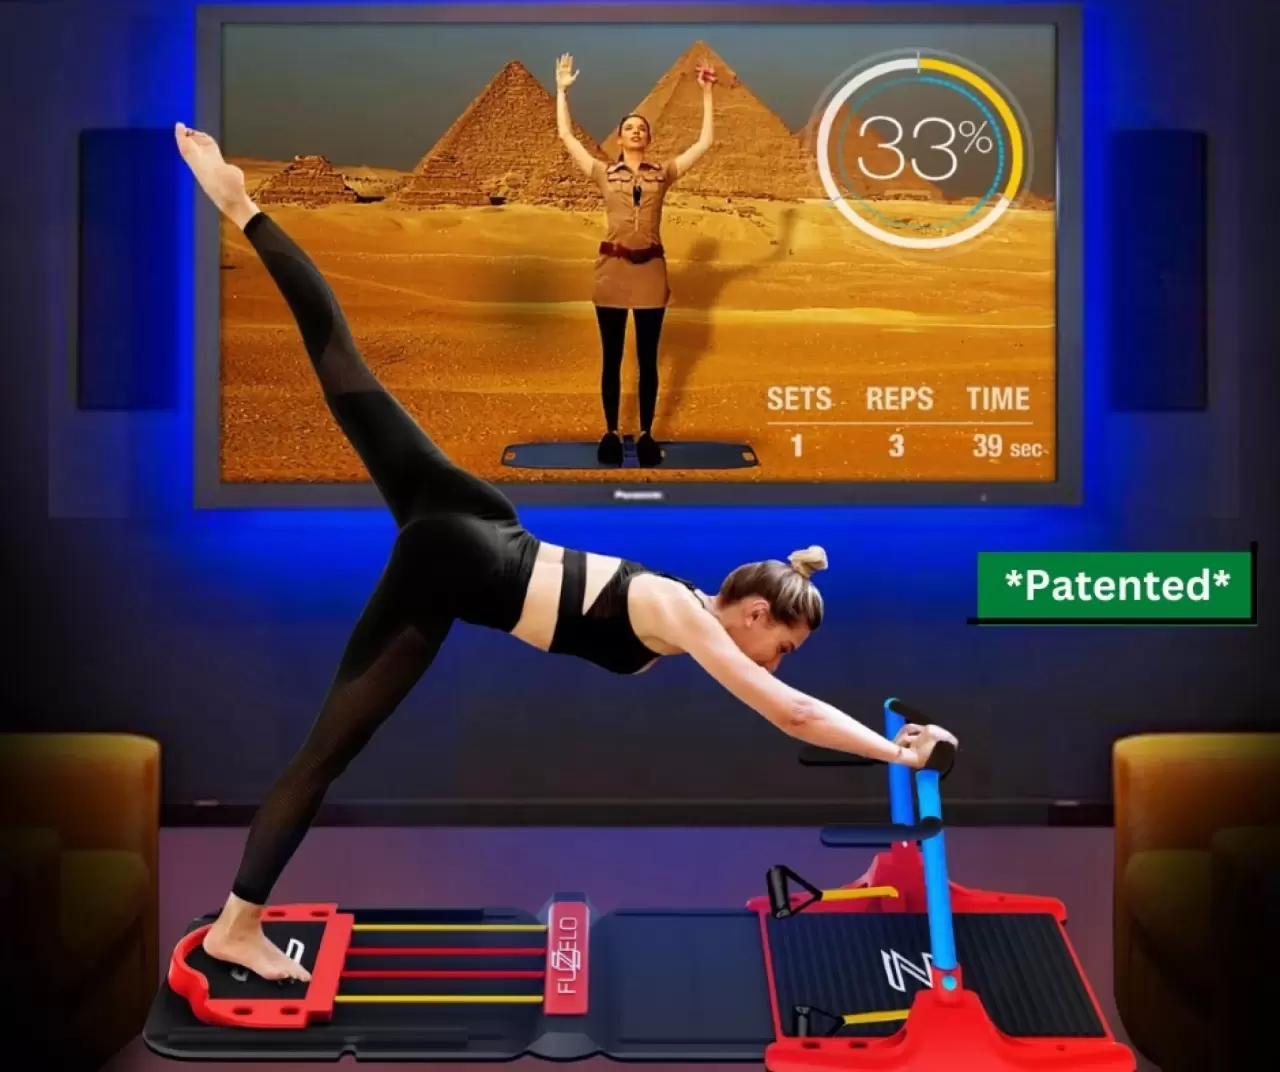 Introducing the Future of Home Exercising: The Fuzelo Patented Metaverse Yoga/Pilates Total Body Gym img#1